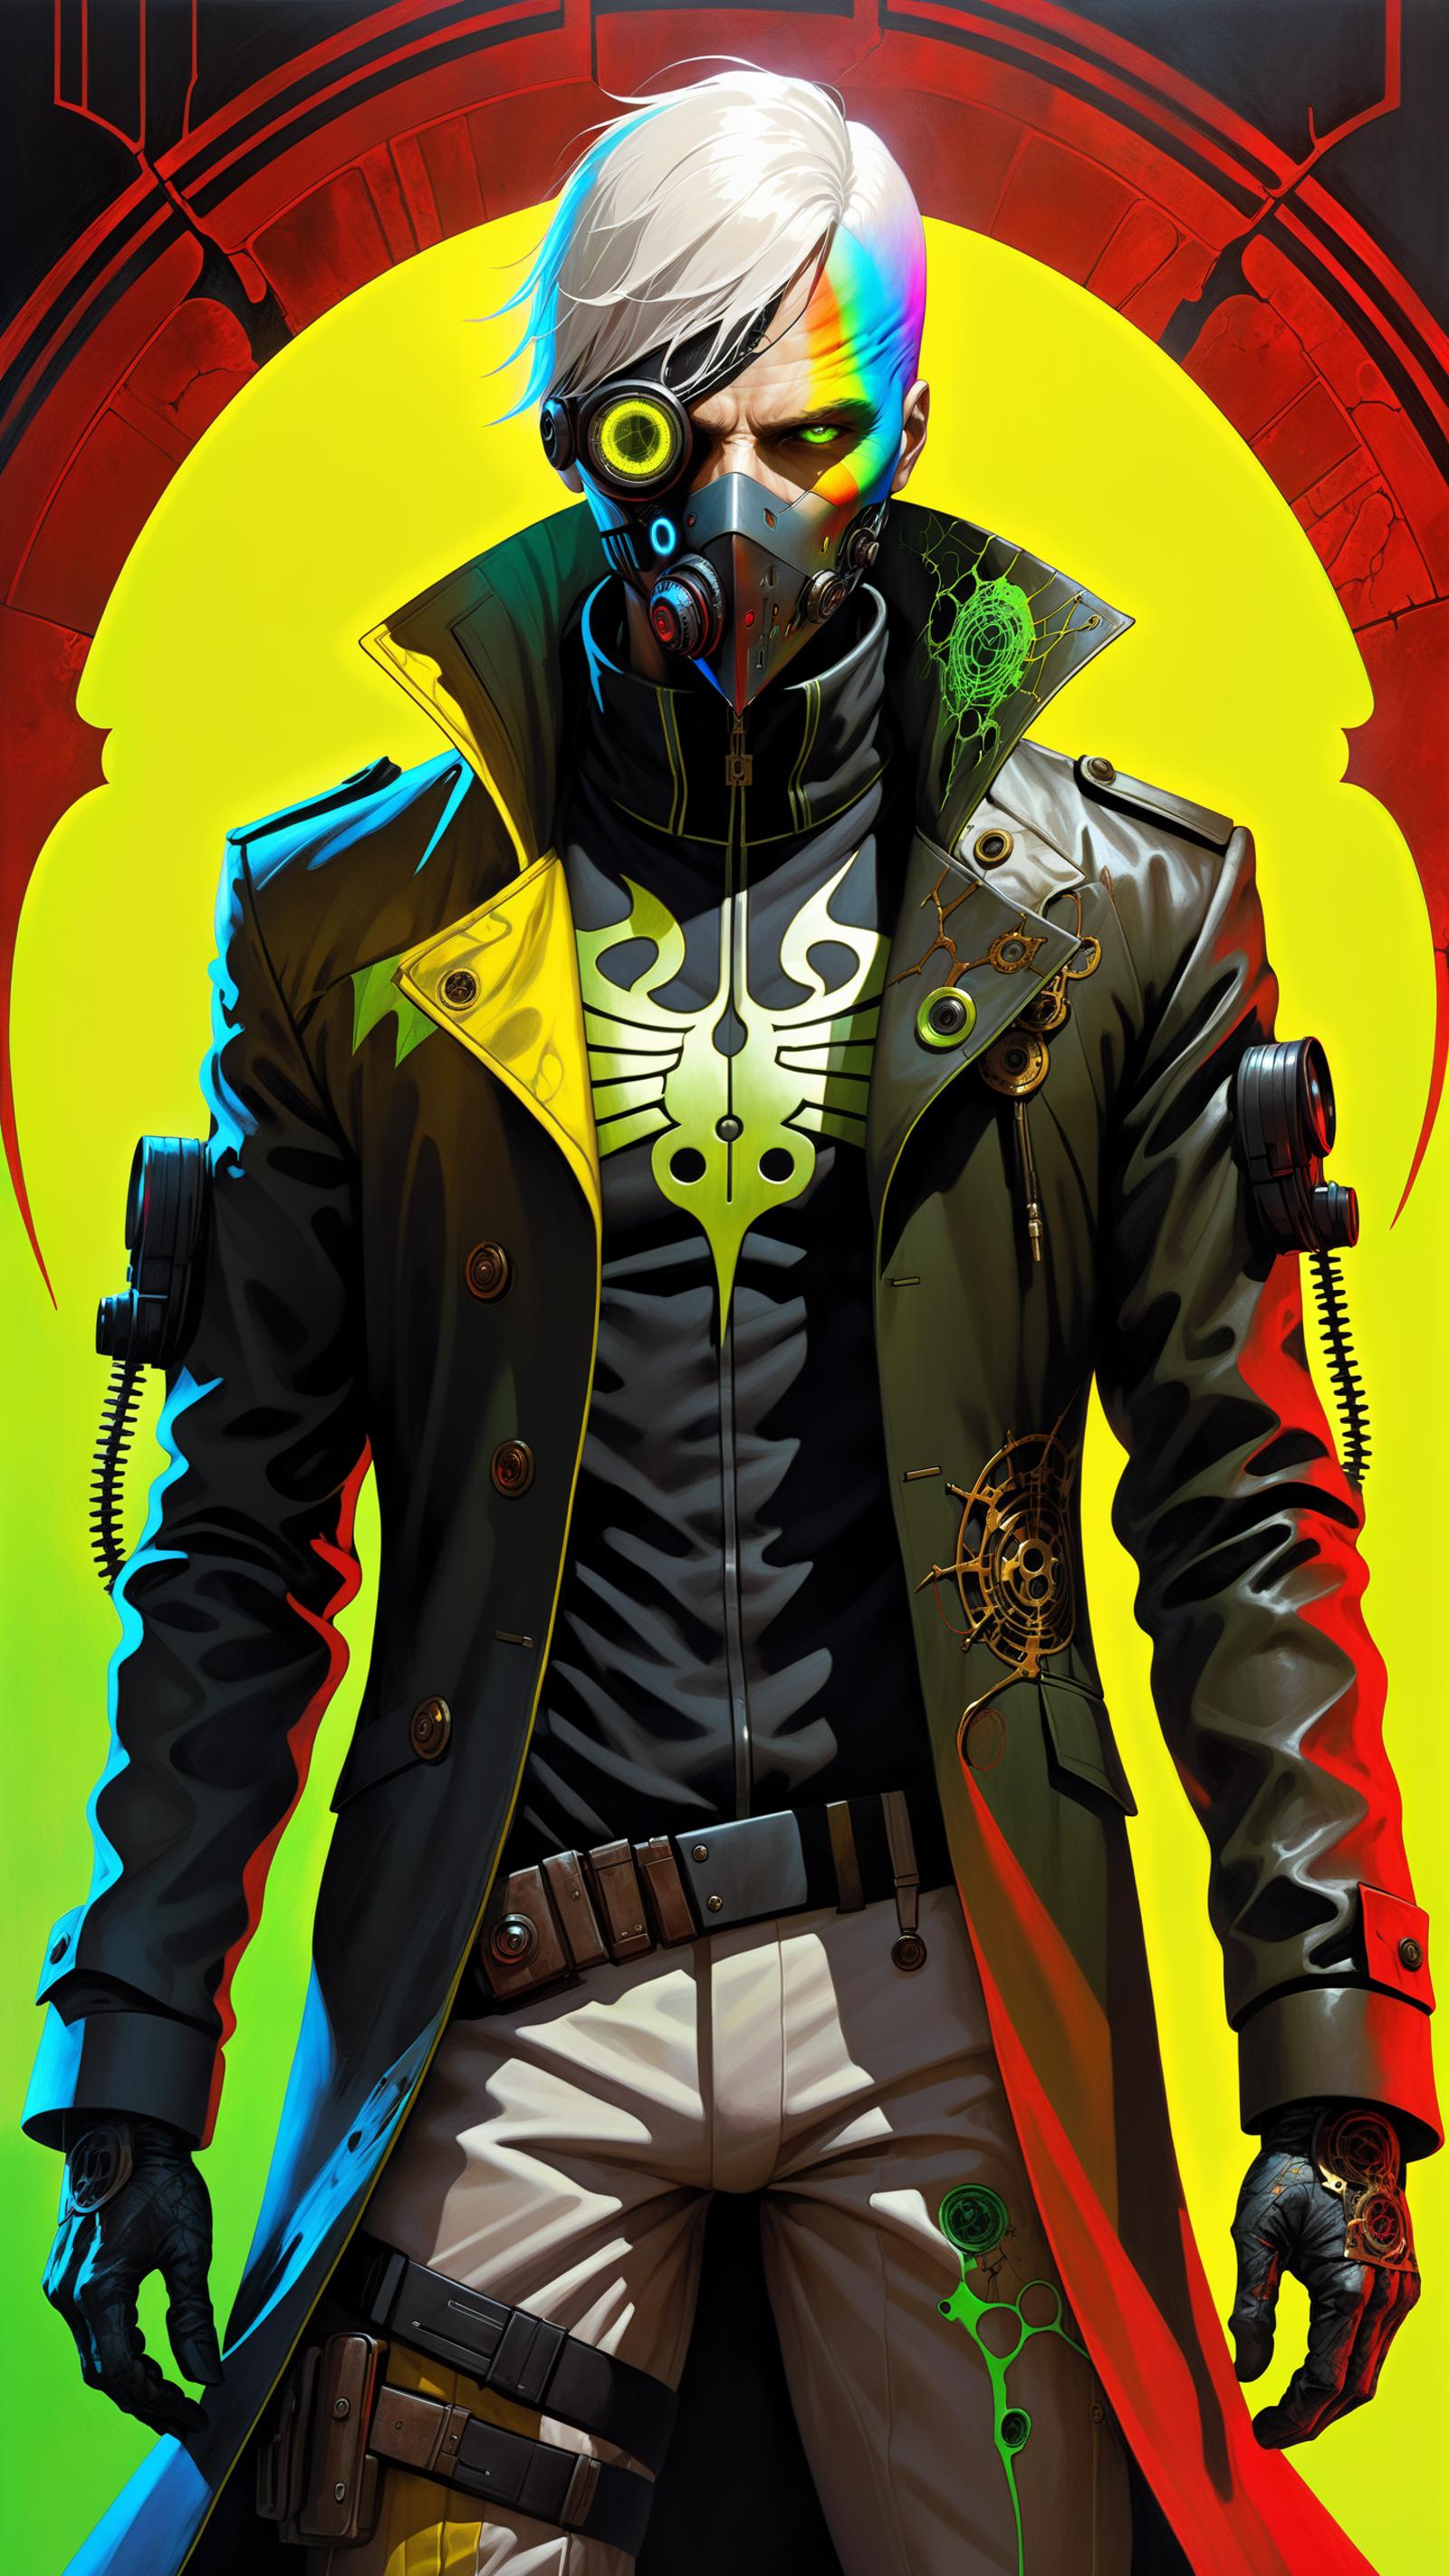 A man wearing a black and yellow jacket and a gas mask.